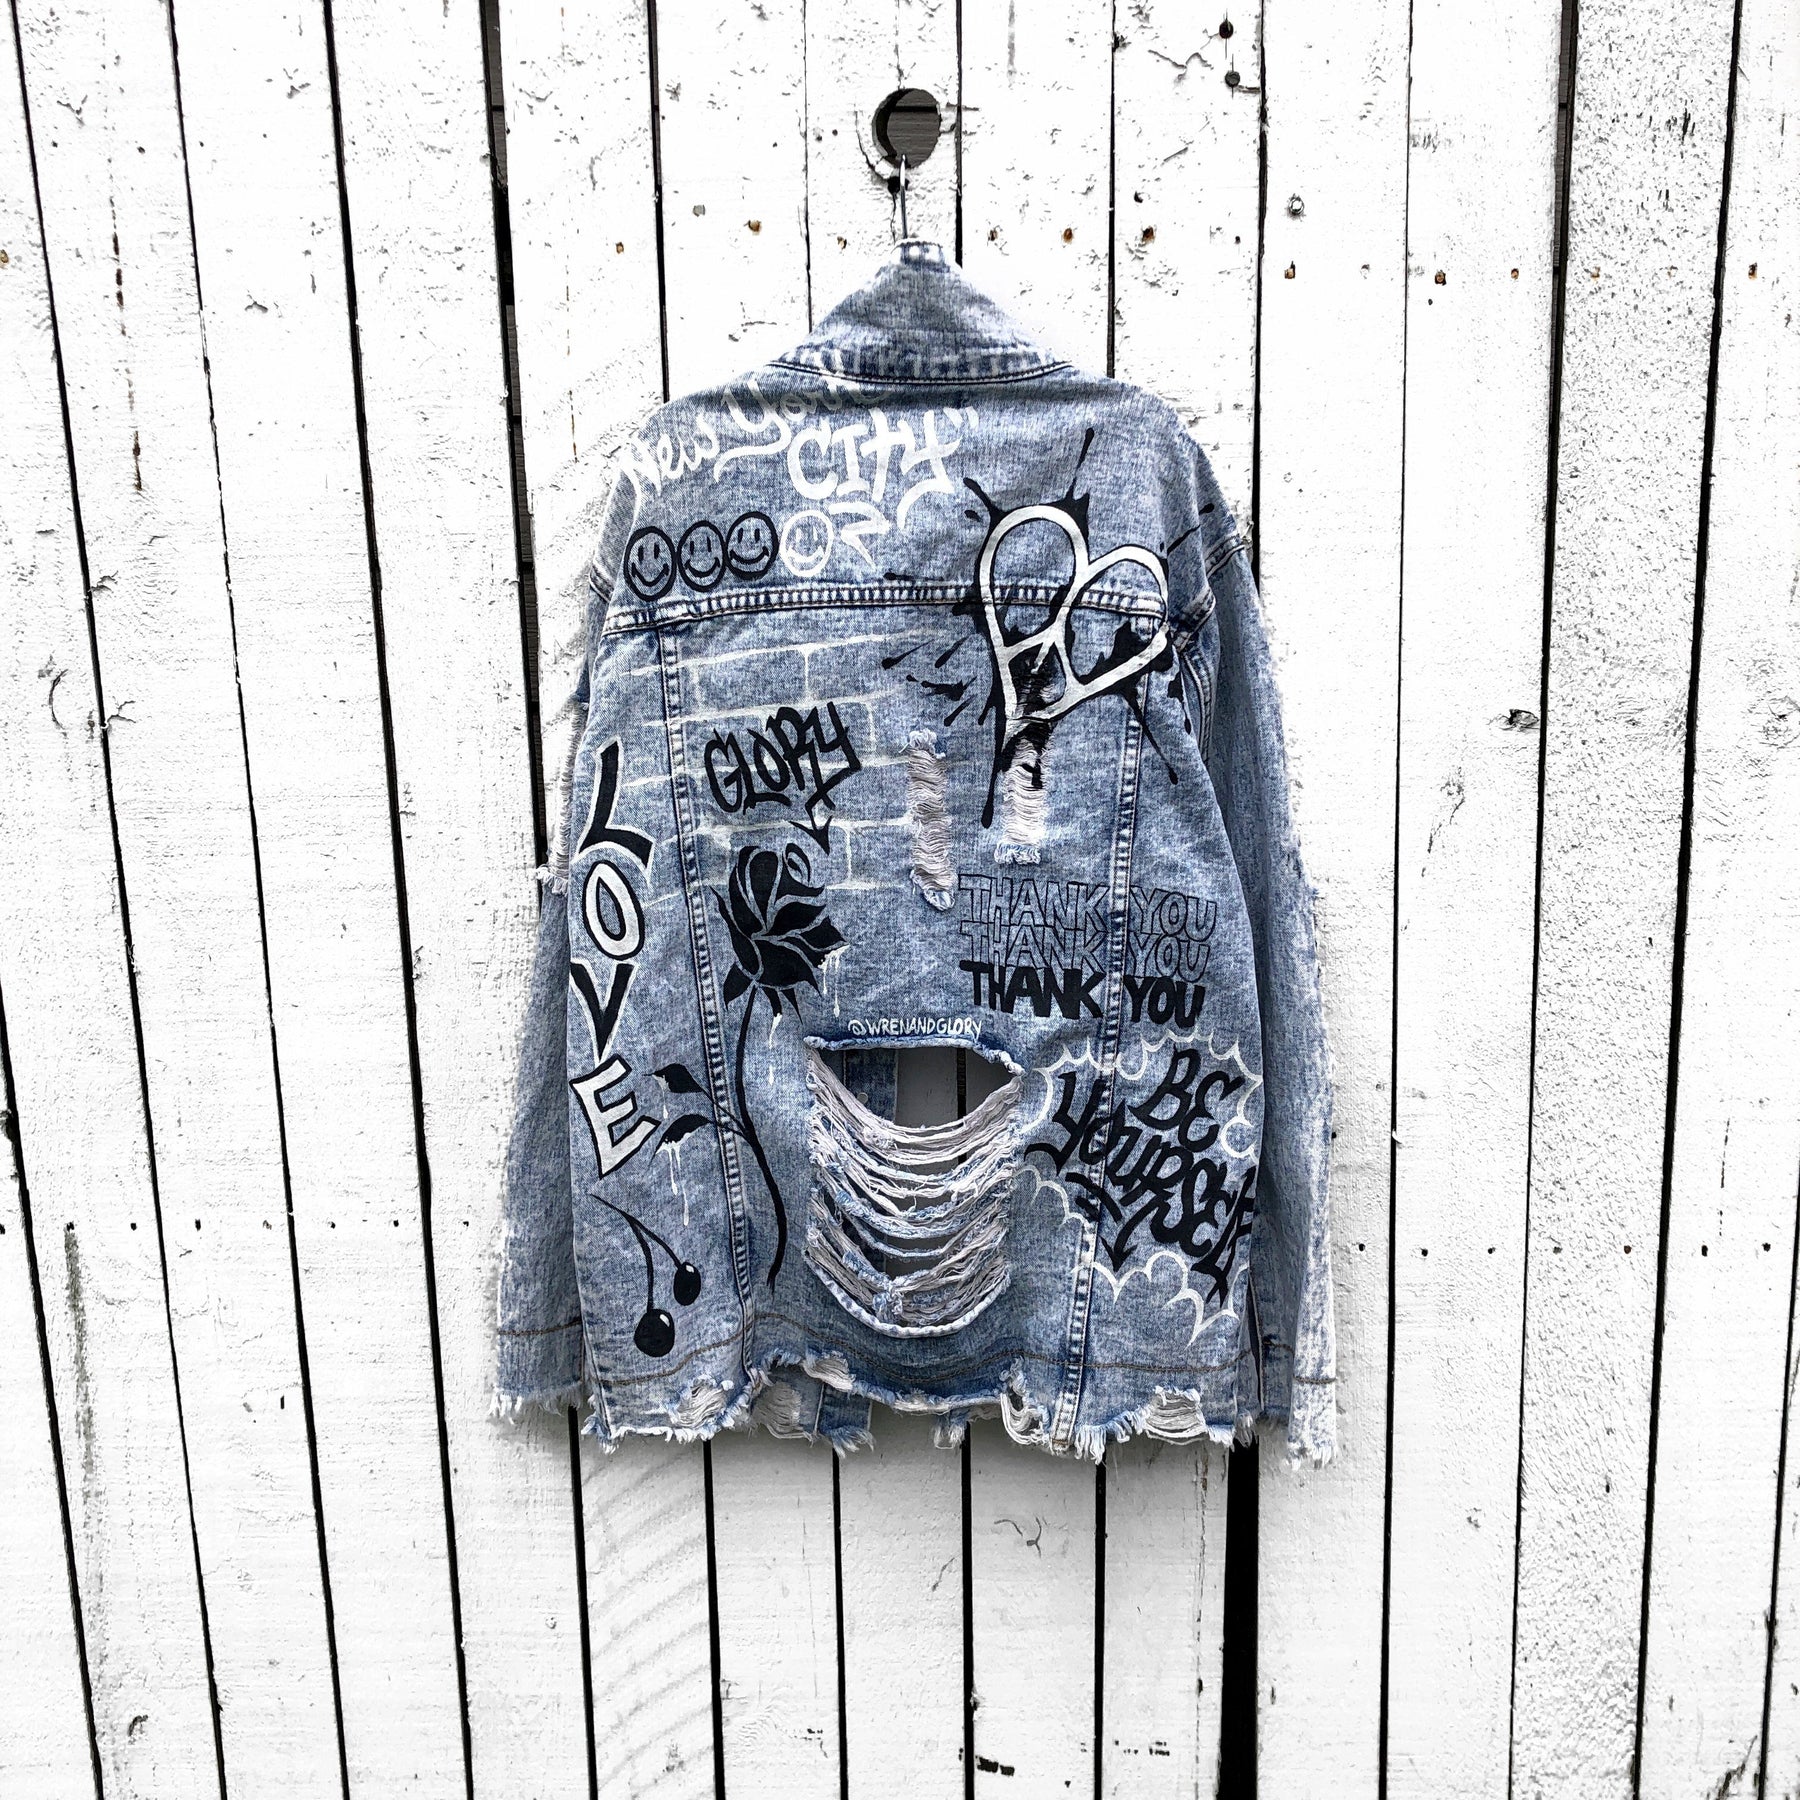 Light blue denim wash. Graffiti style paint throughout entire jacket, in black and white. Choose your name and city to be painted on. Please specify info above. Signed @wrenandglory.